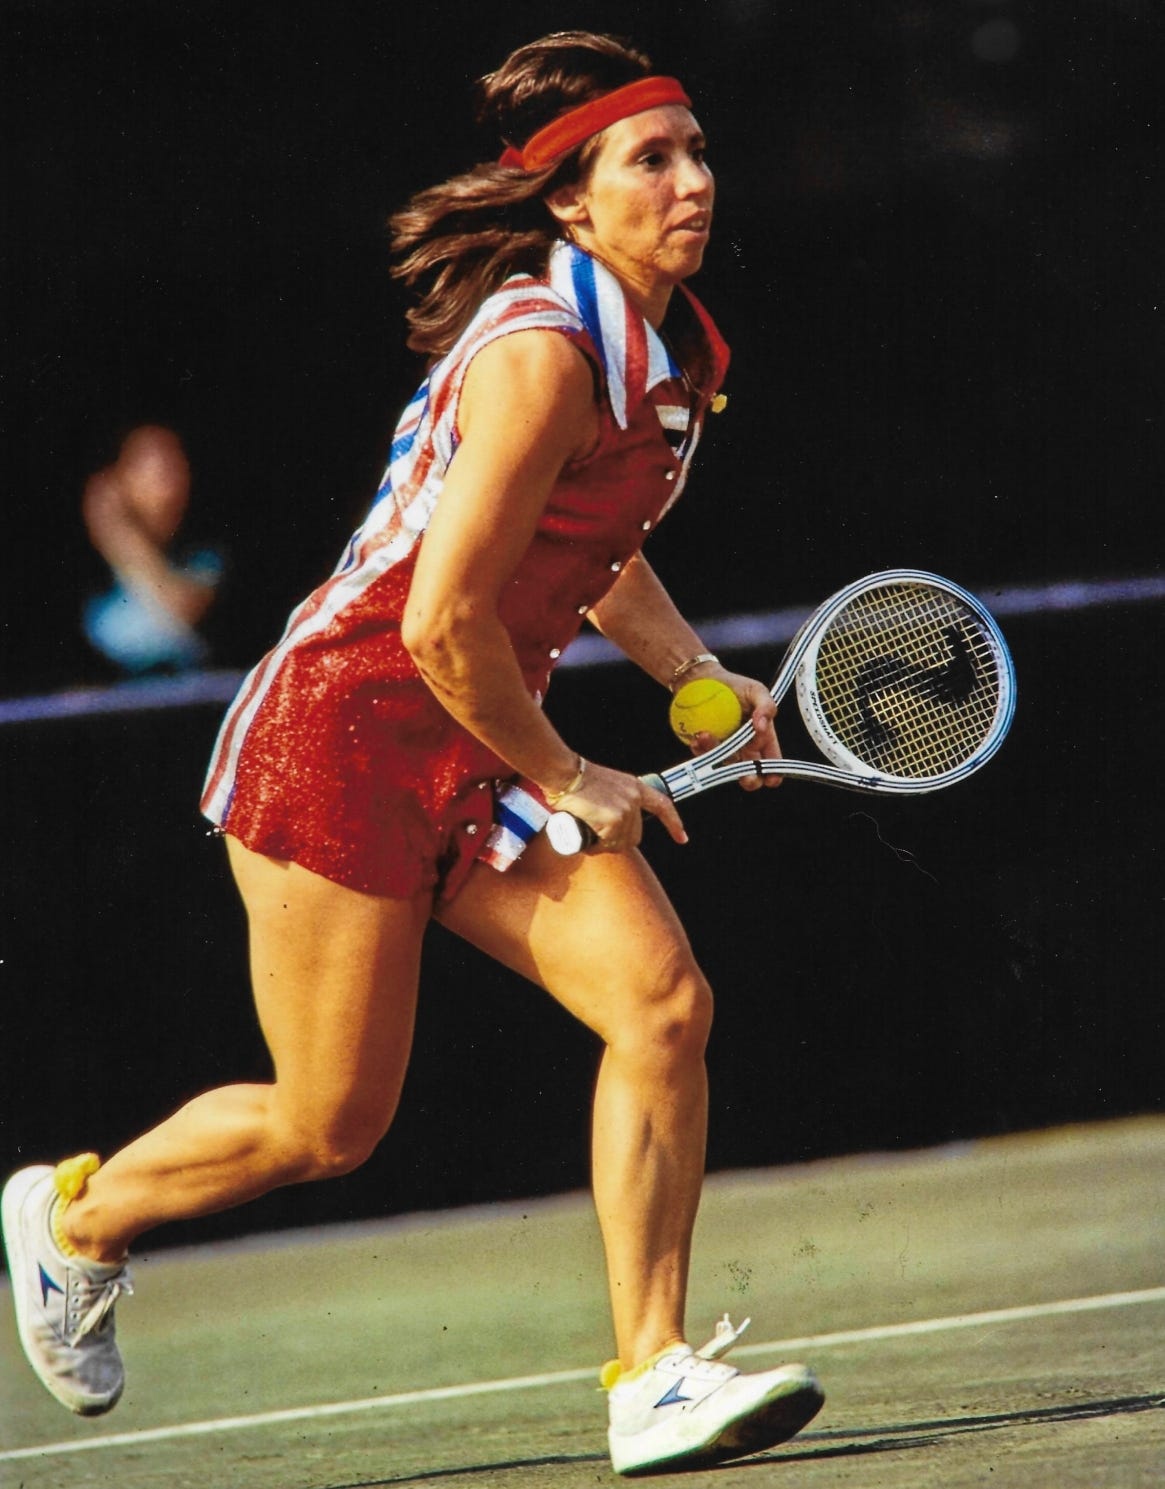 The Original 9 influenced how women in tennis are advocating for change